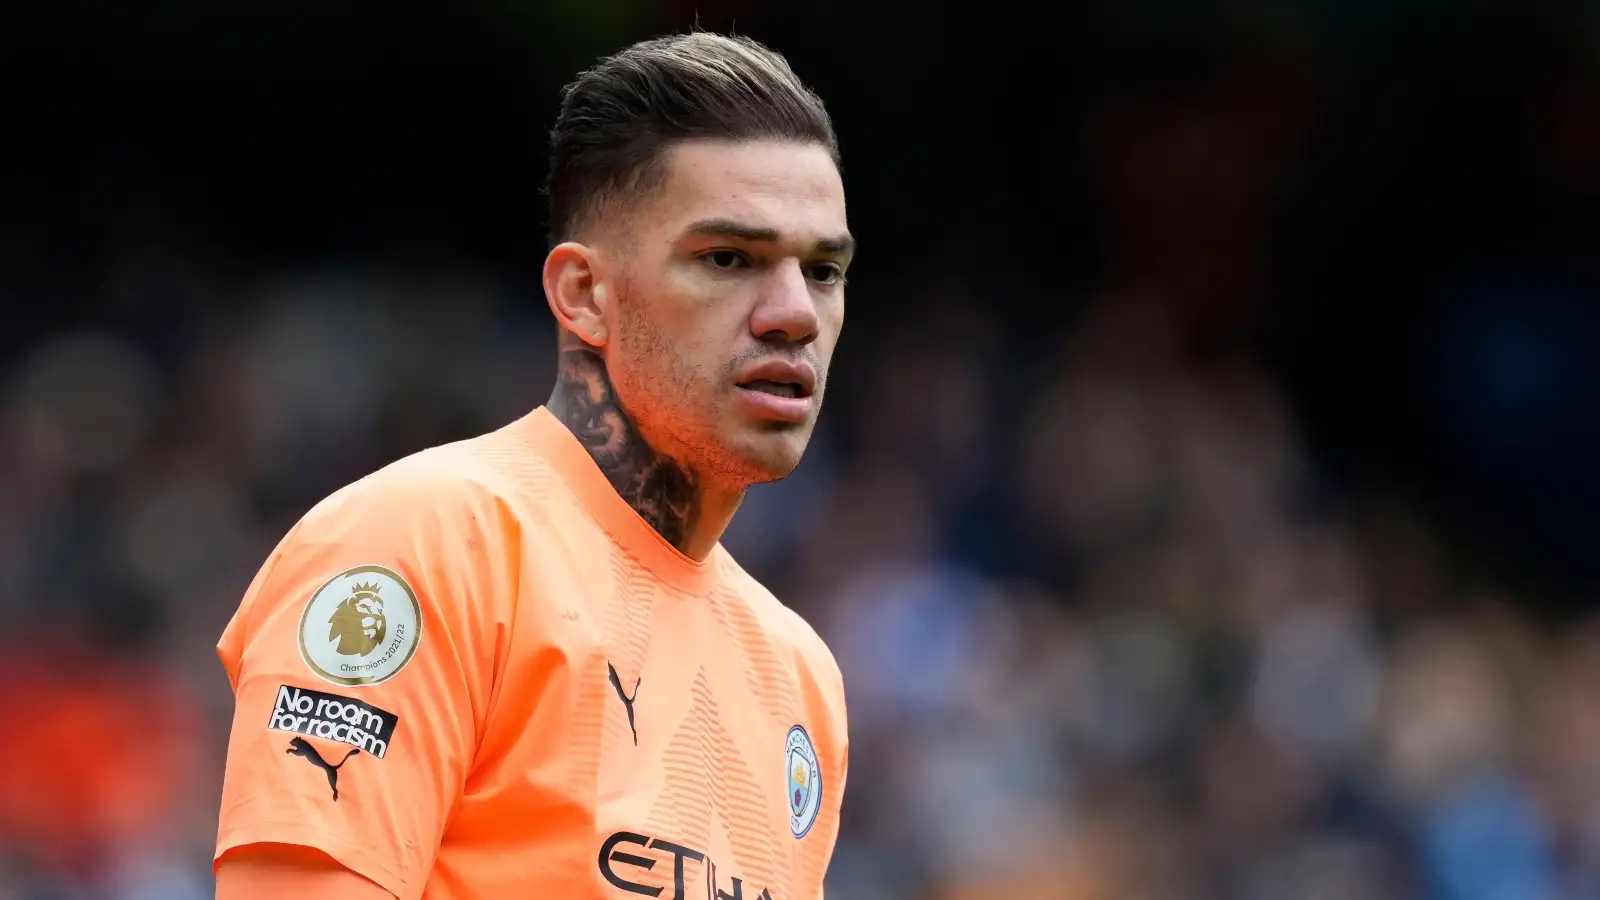 The 25 goalkeepers with the most PL clean sheets: Ederson, De Gea, Cech…